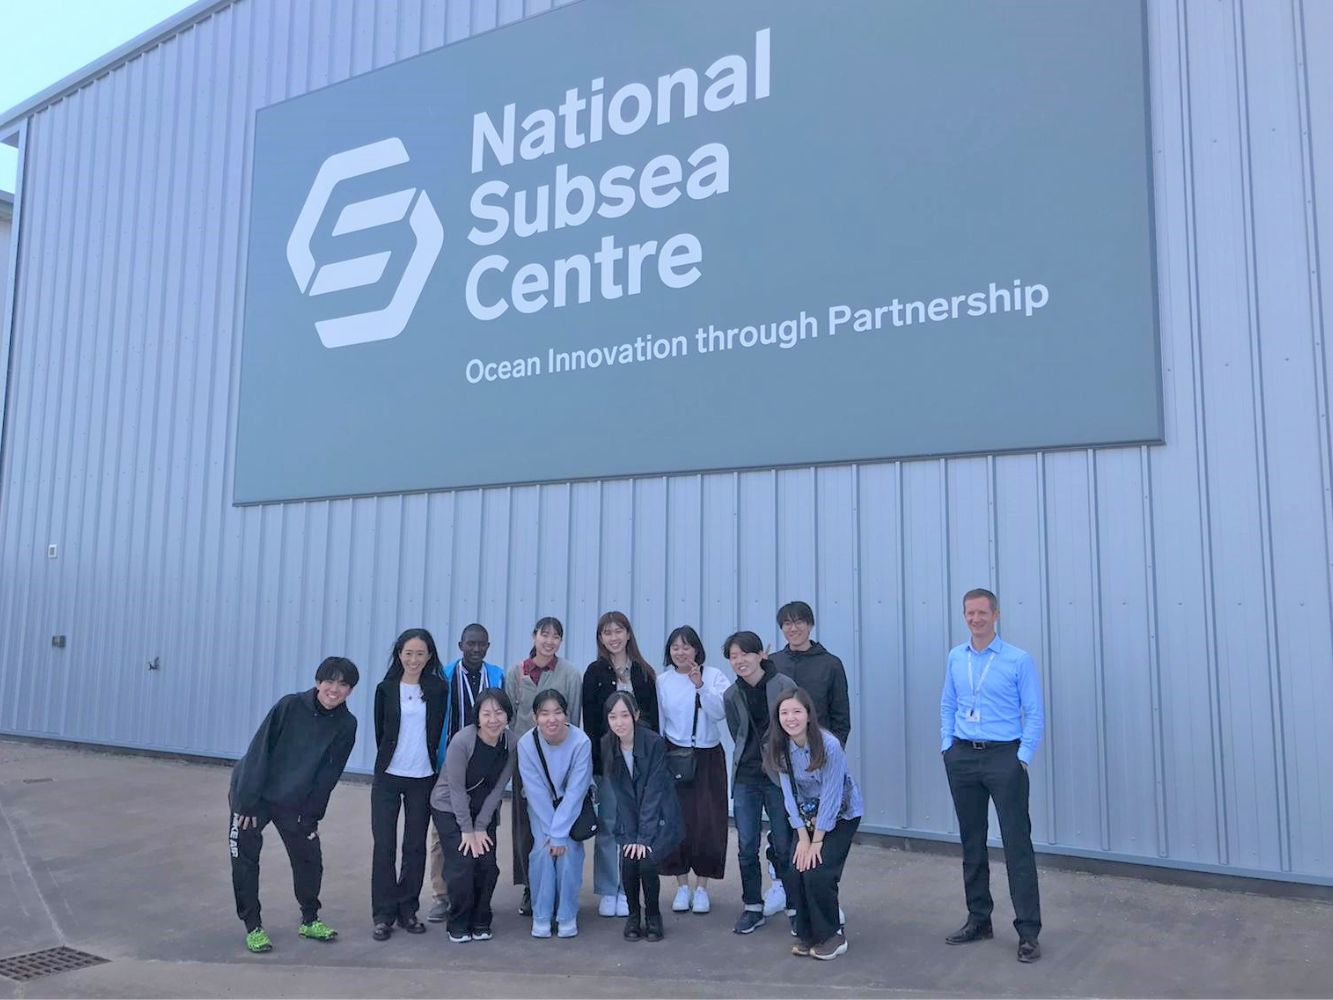 Japanese students visiting the National Subsea Centre